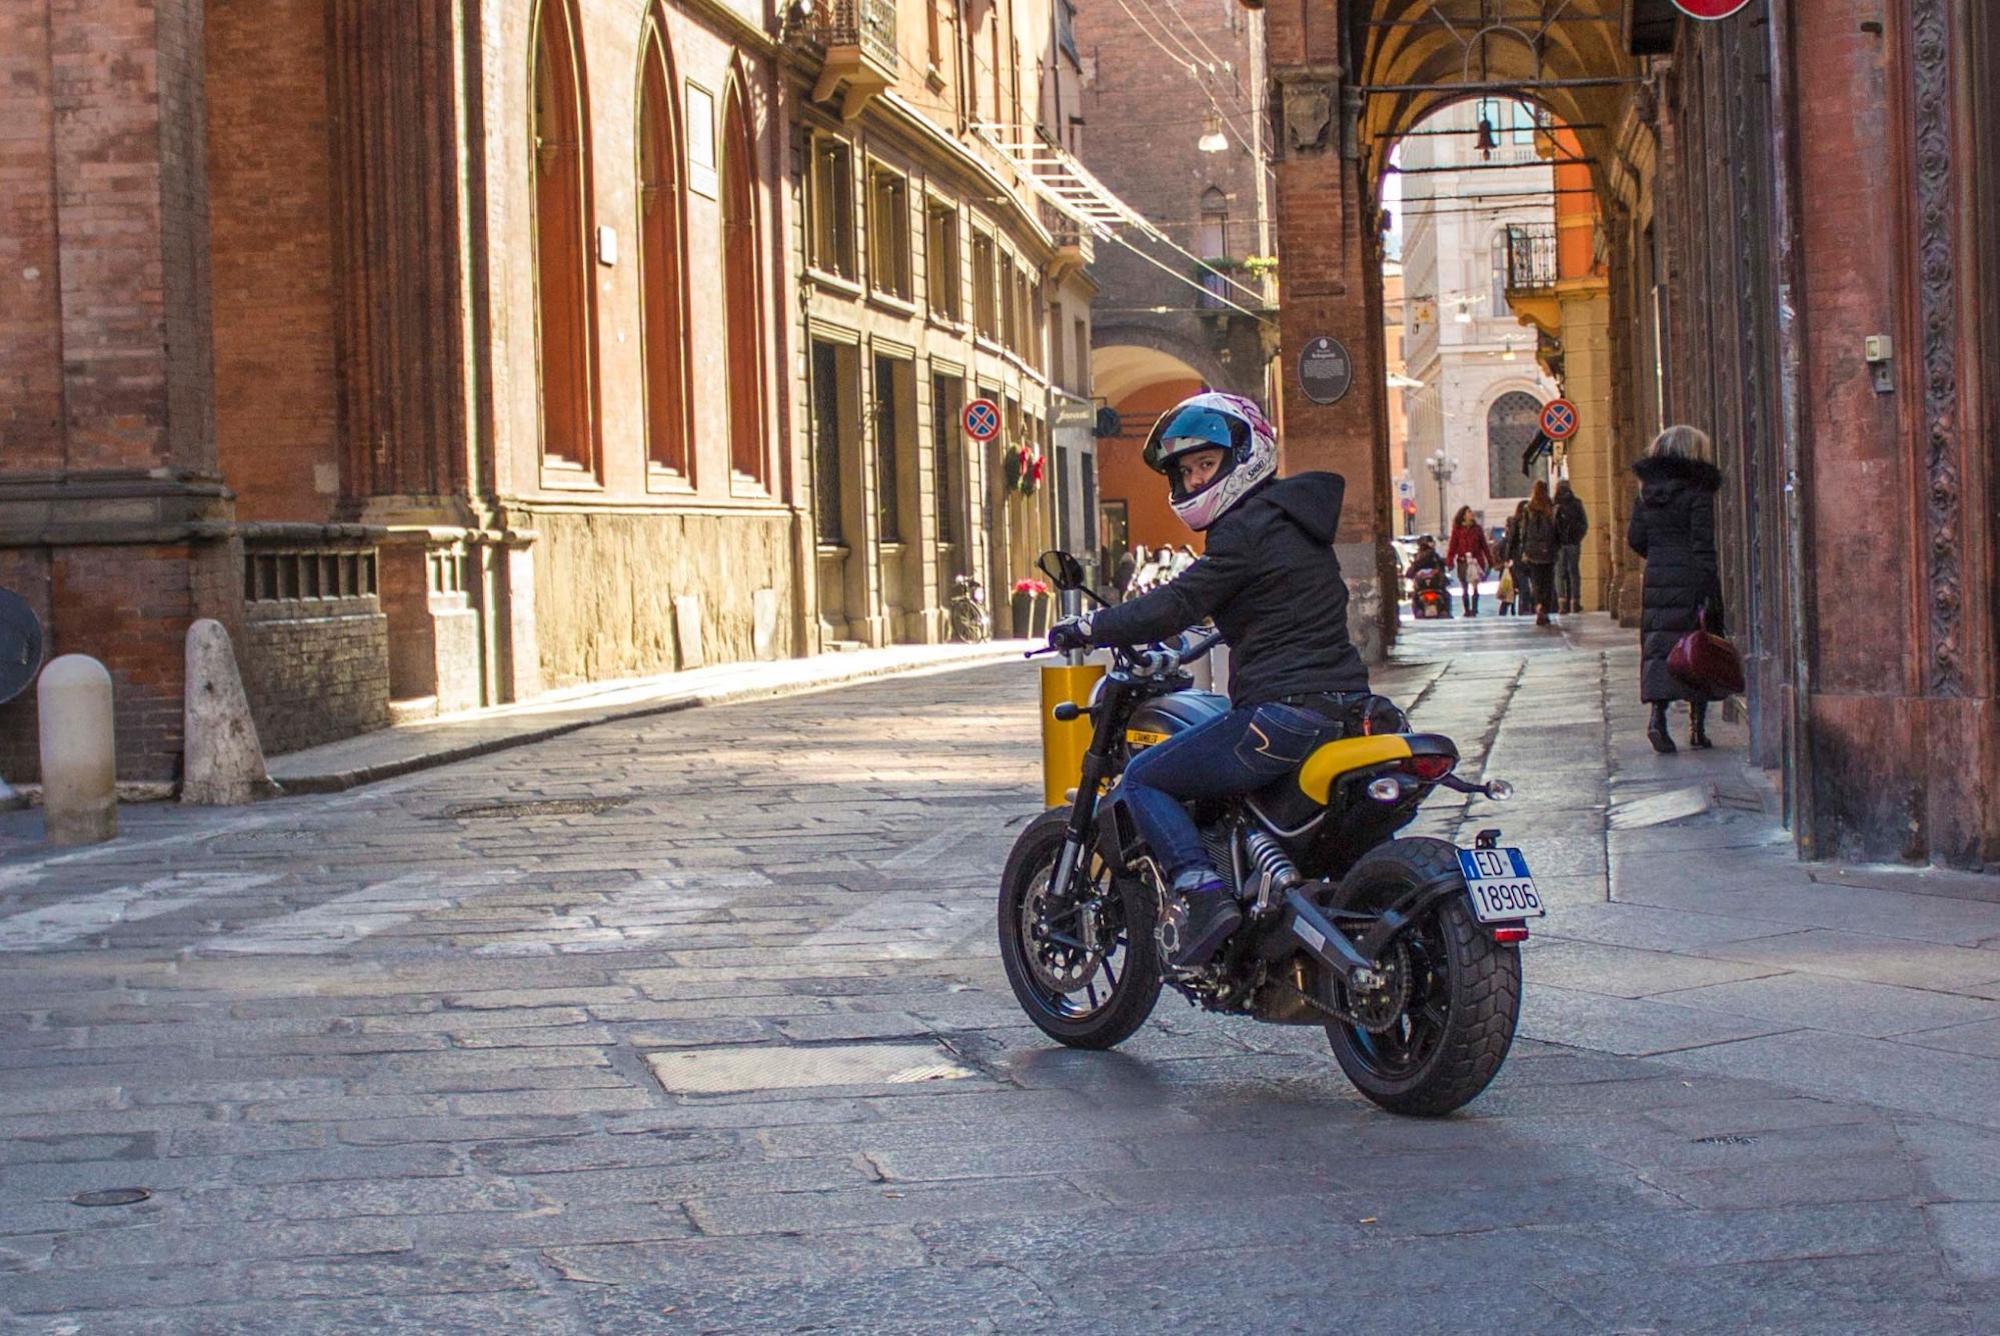 MissBiker enjoying a scoot around some of Italy's points of interest. Media sourced from Motorcycle.com.